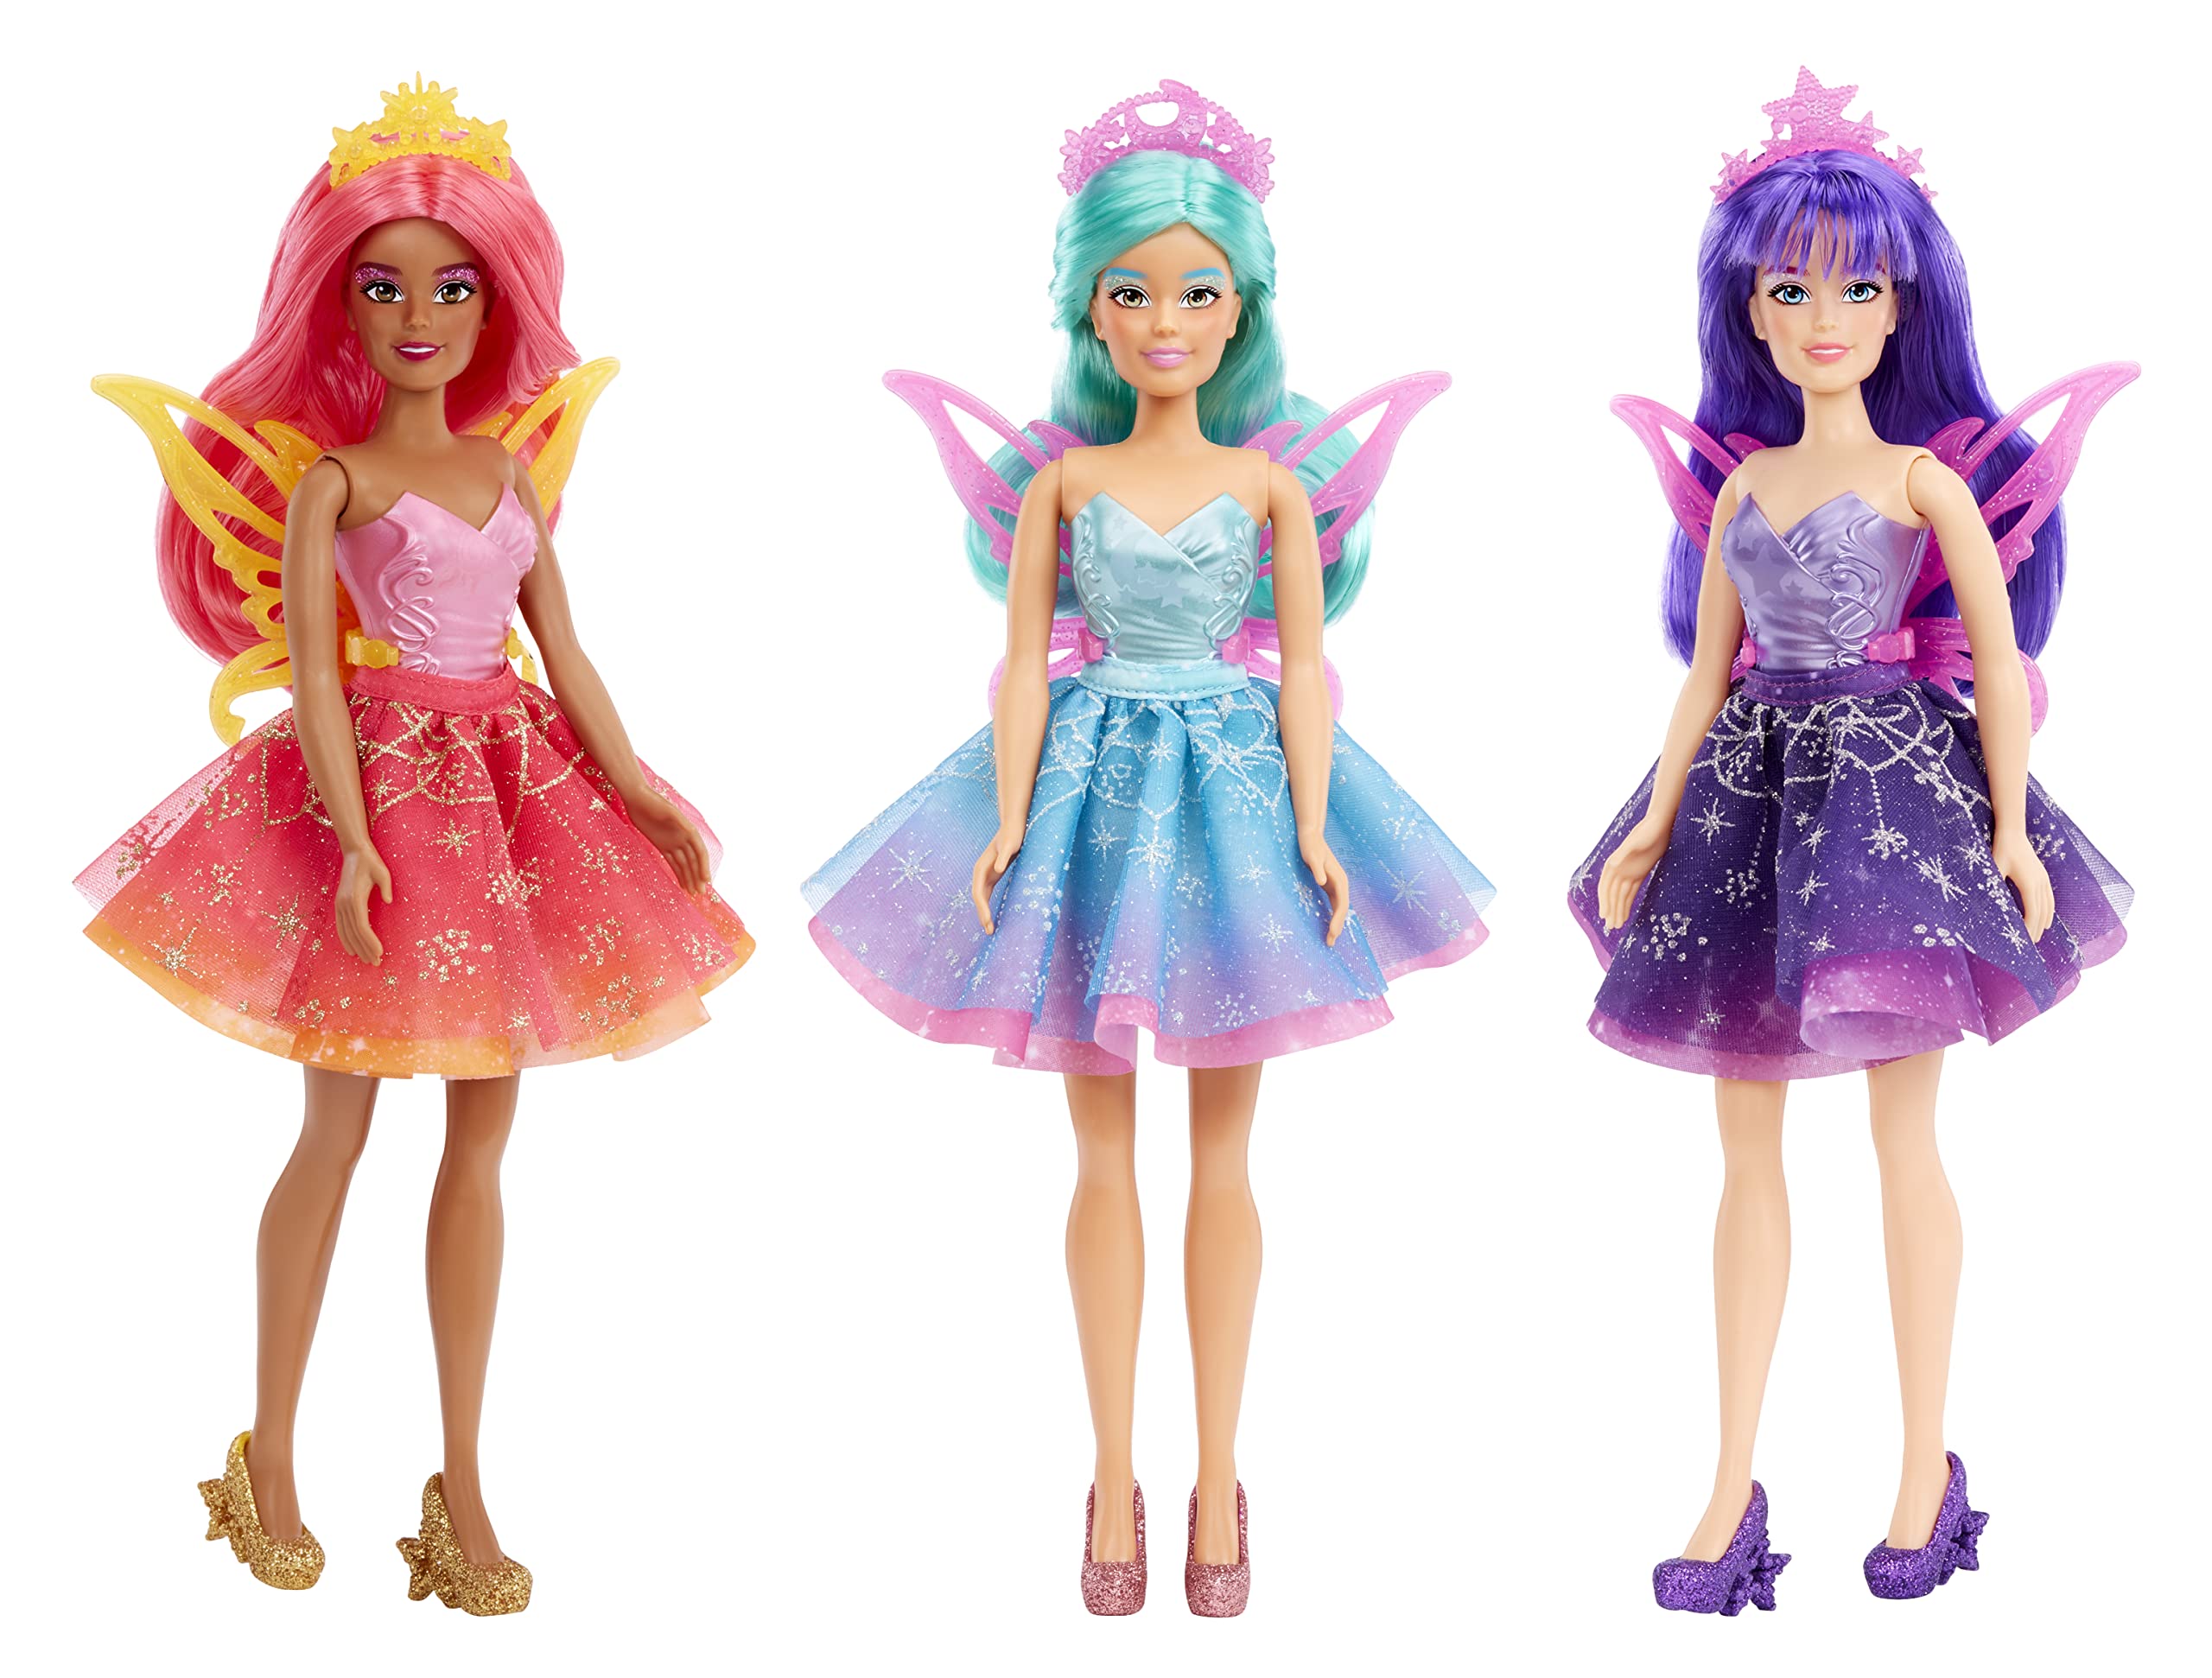 MGA Entertainment Dream Ella Color Change Surprise Fairies Celestial Series Doll - Yasmin Sun Inspired Fairy with Iridescent Sparkly Wings & Purple Hair, Great Gift, for Kids Ages 3, 4, 5+ (585121)